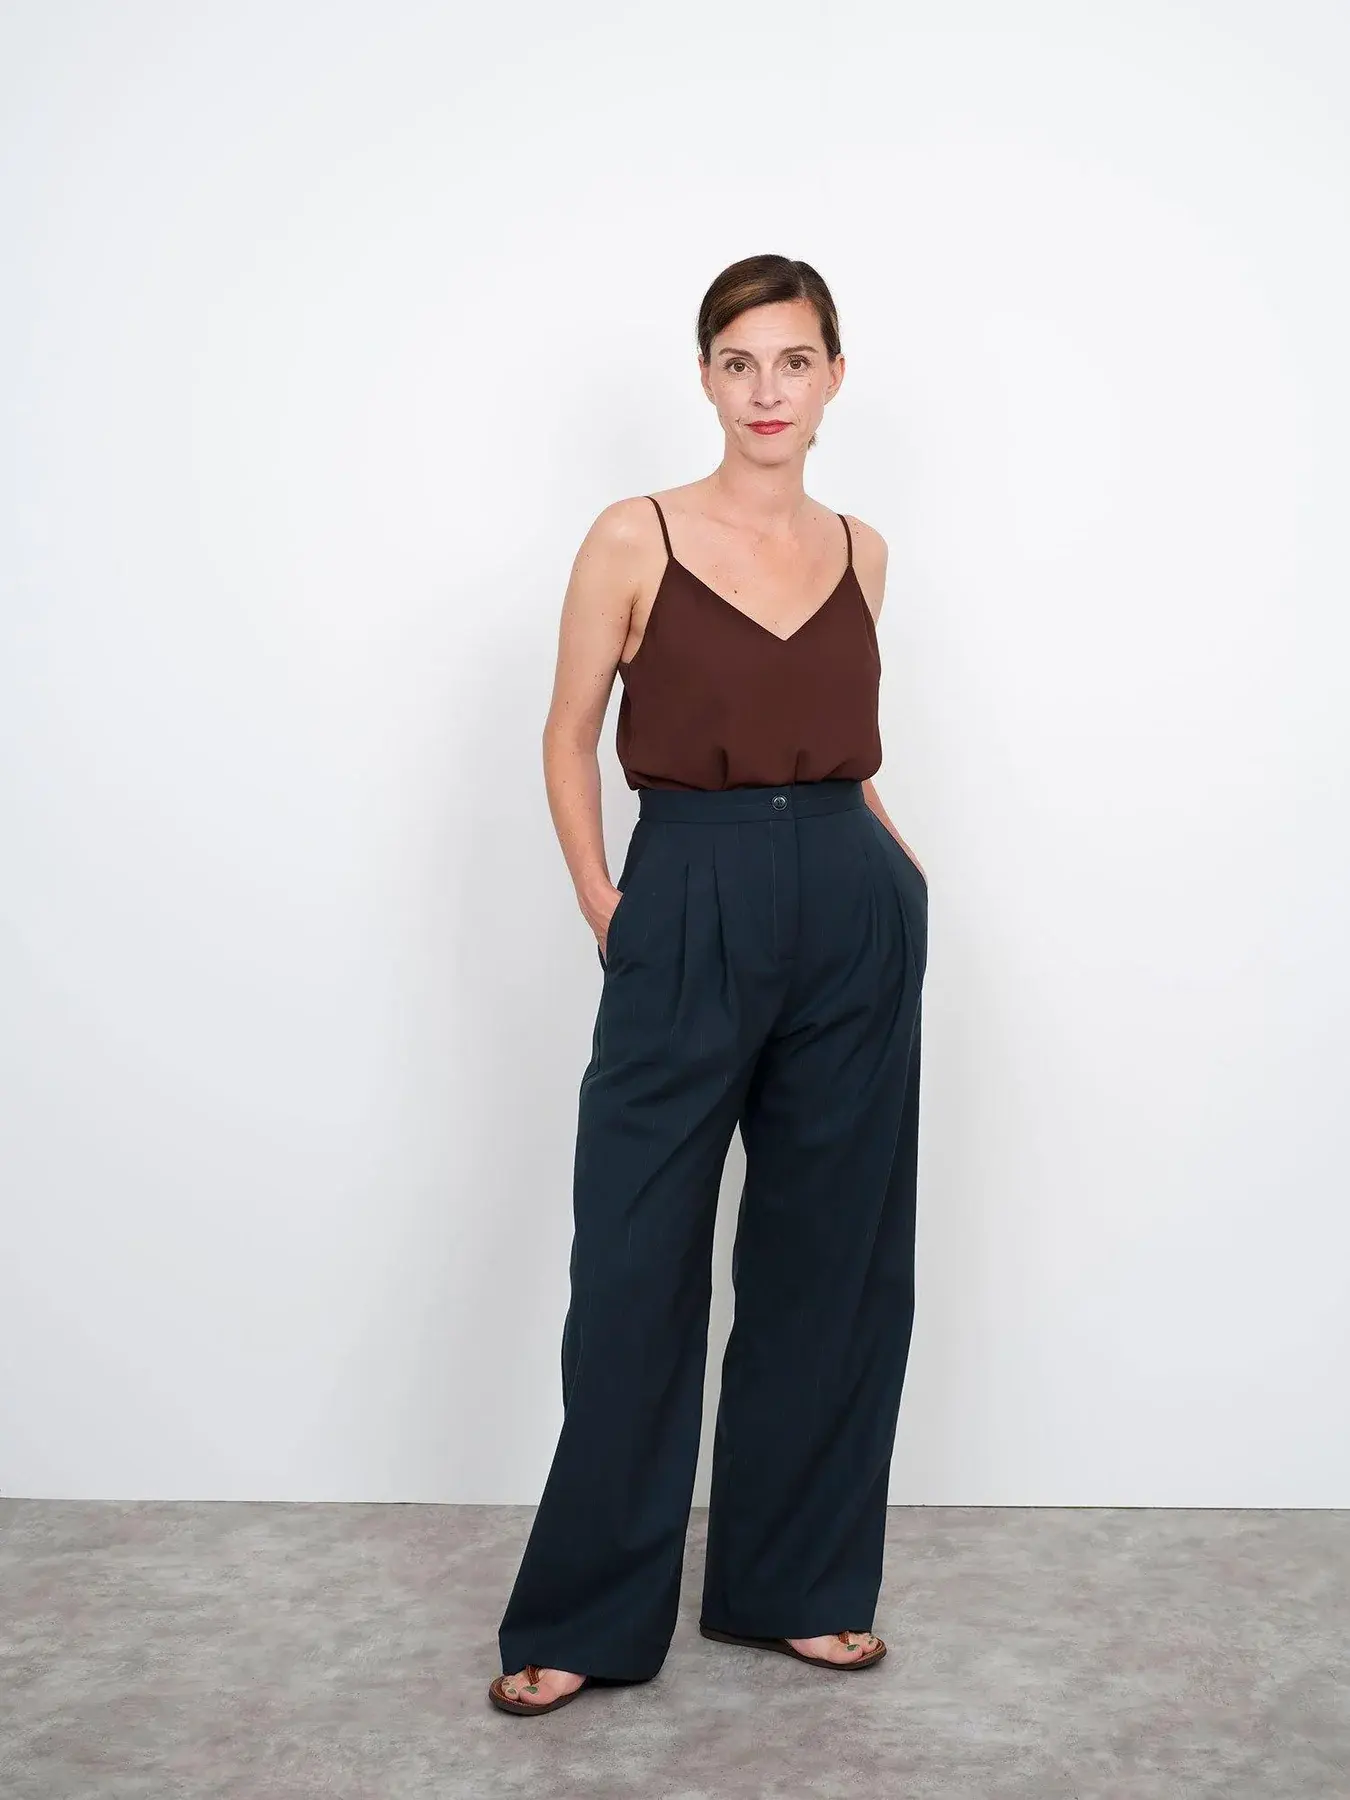 The Assembly Line Patterns The Assembly Line Patterns- High Waisted Trouser XS-L